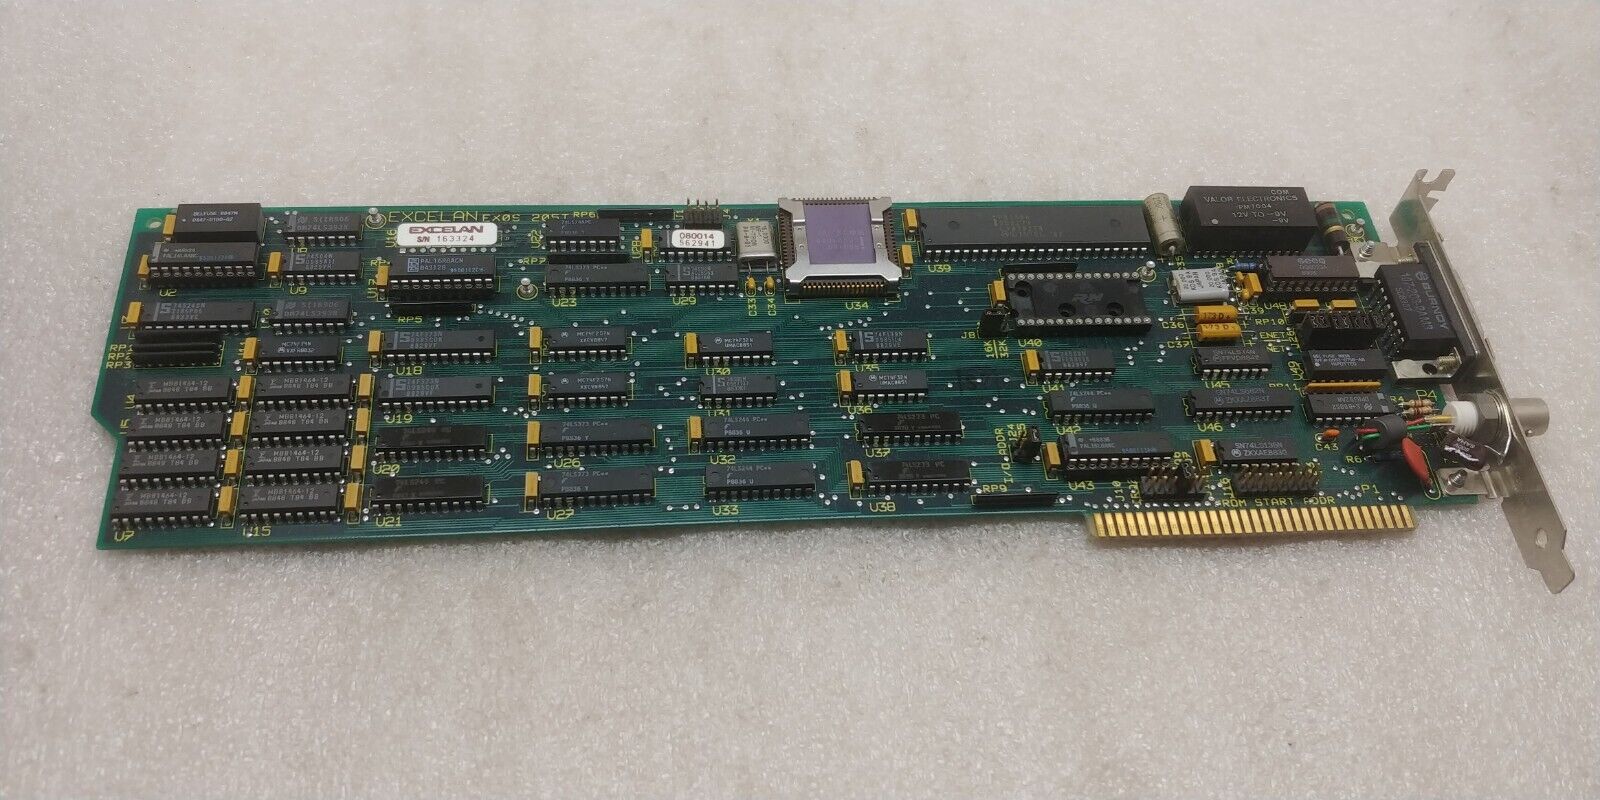 Excelan Exos 8-Bit ISA Network Card 205T RP6 GREAT CONDITION 